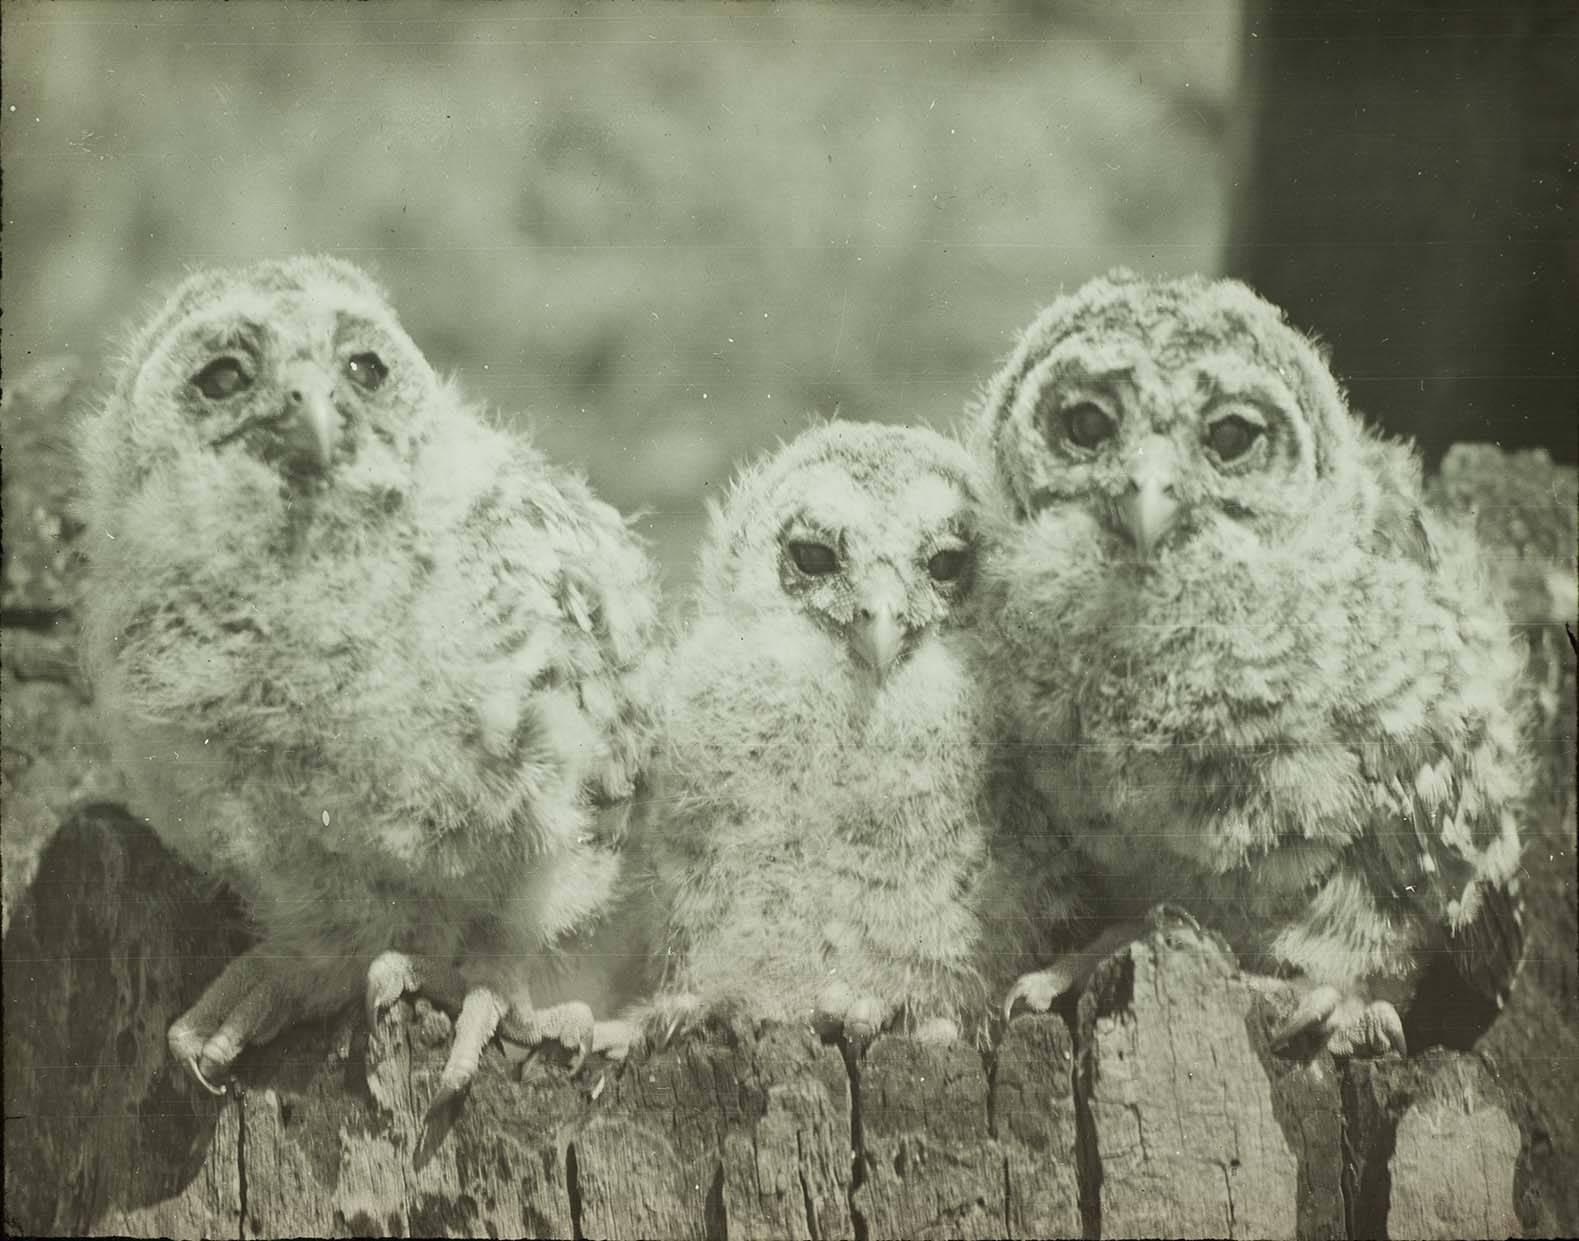 Lantern slide and photograph of three young Barred Owls perching on a tree trunk